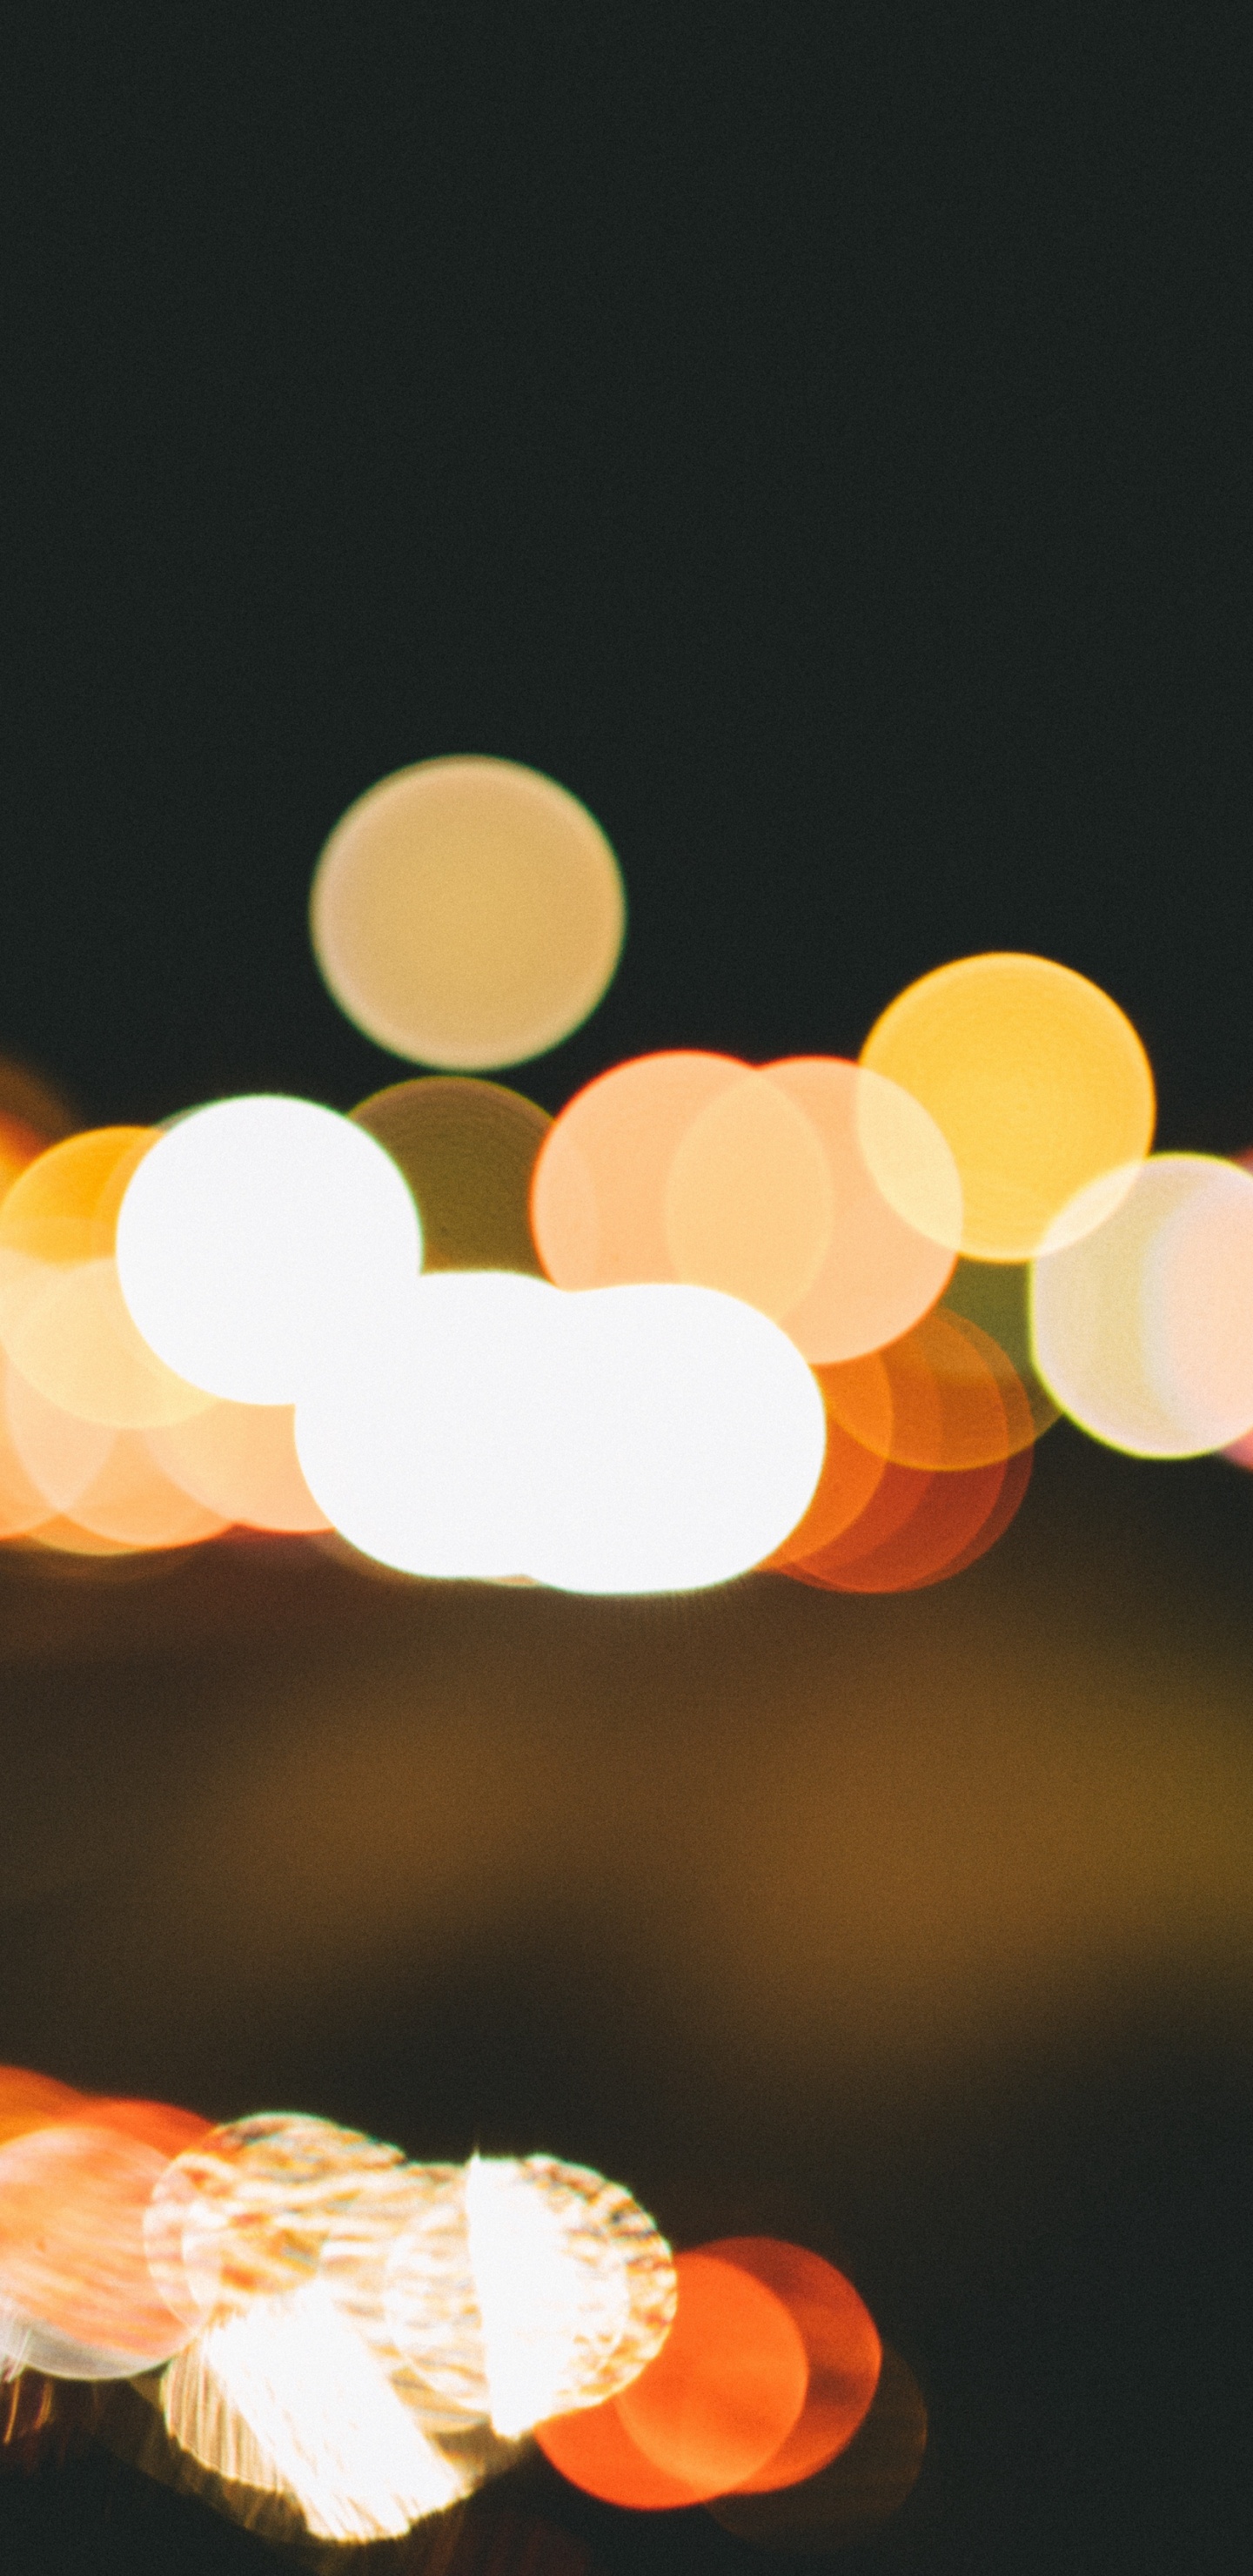 Bokeh Photography of Yellow Lights. Wallpaper in 1440x2960 Resolution